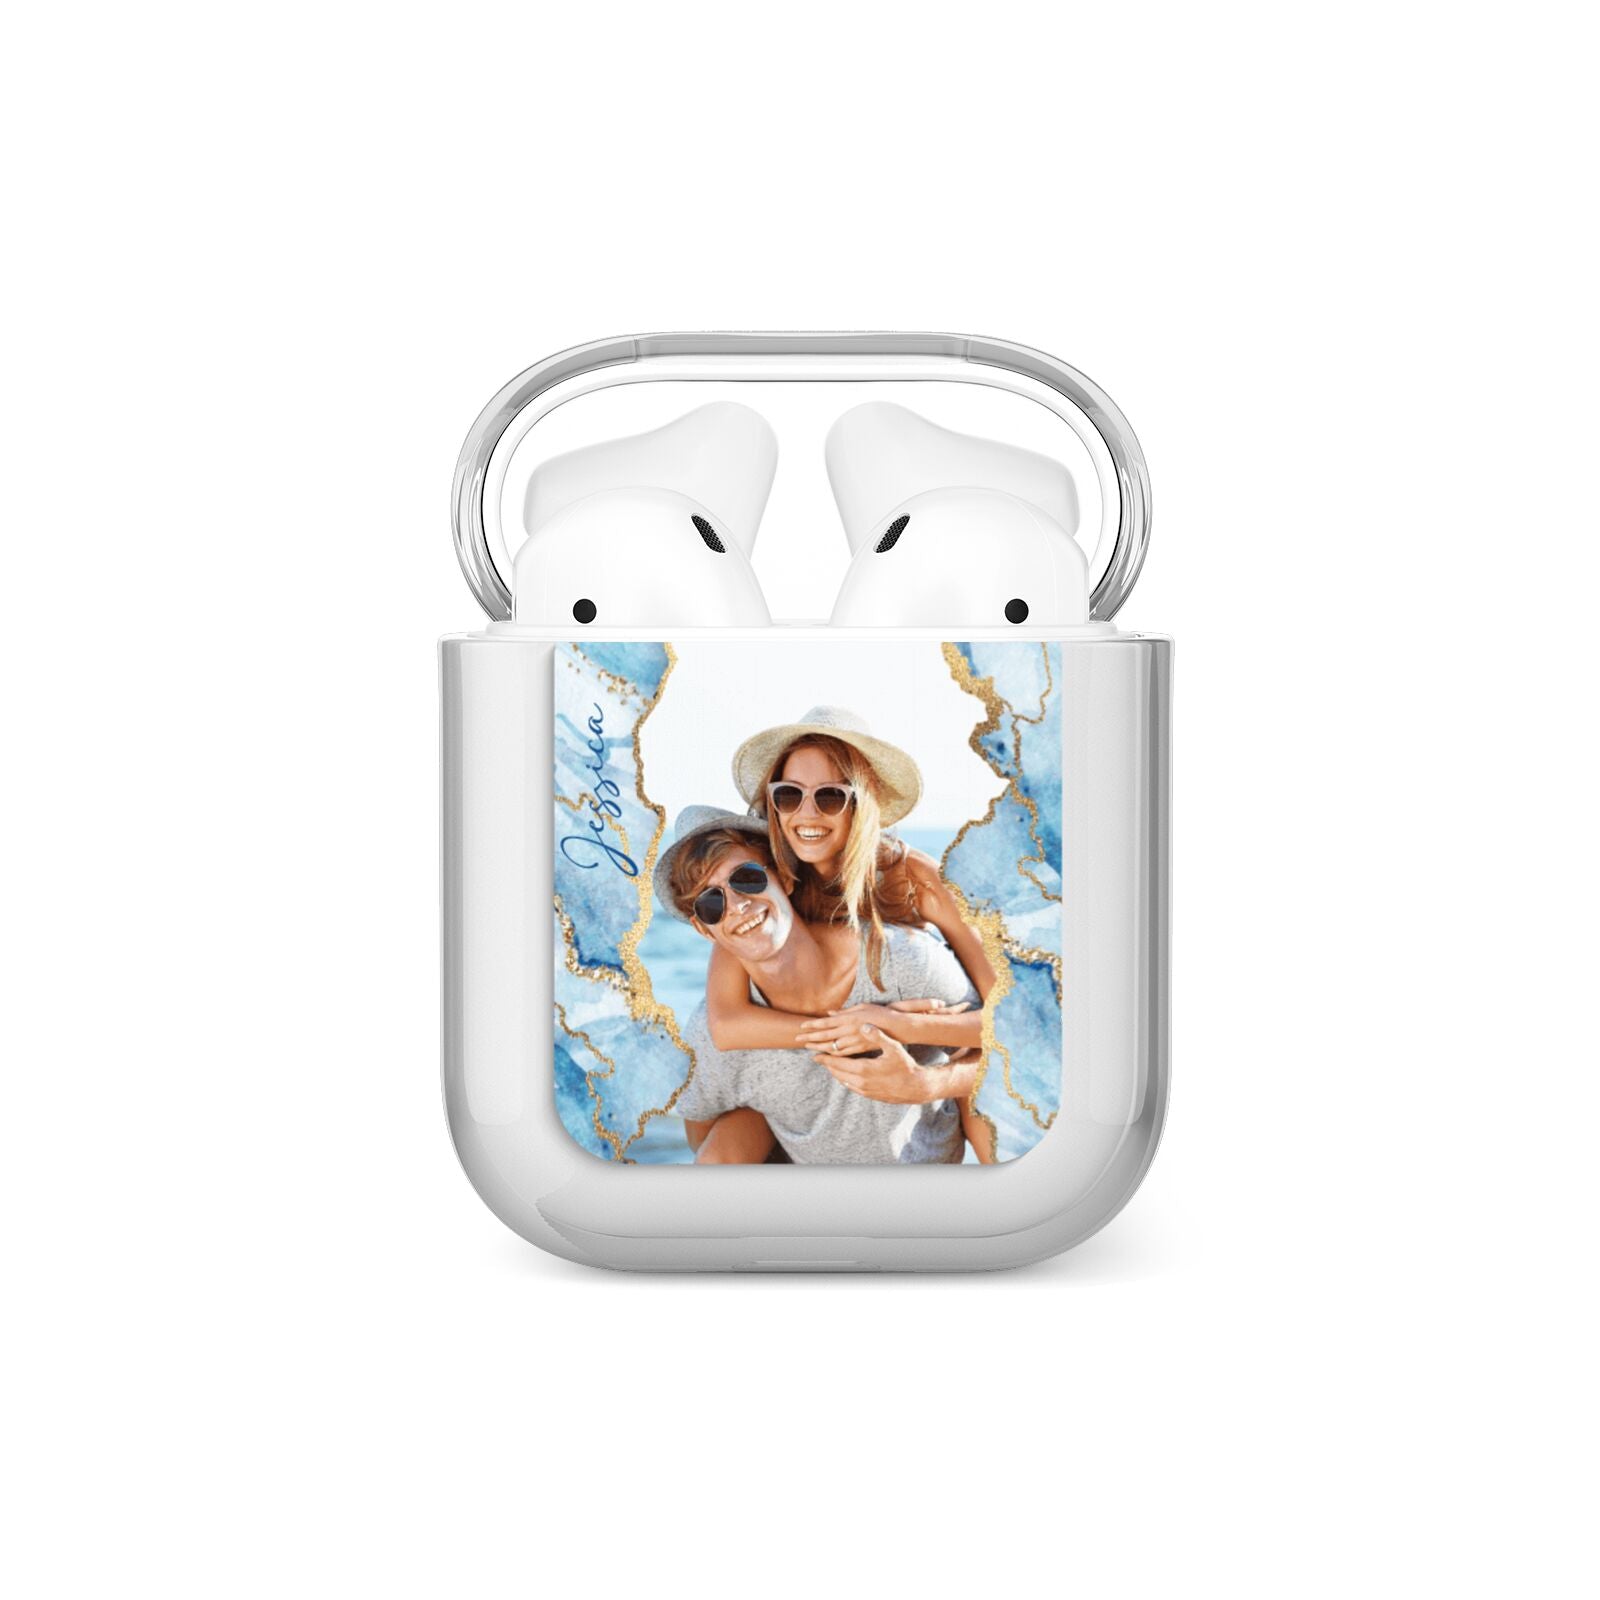 Personalised Photo Marble AirPods Case